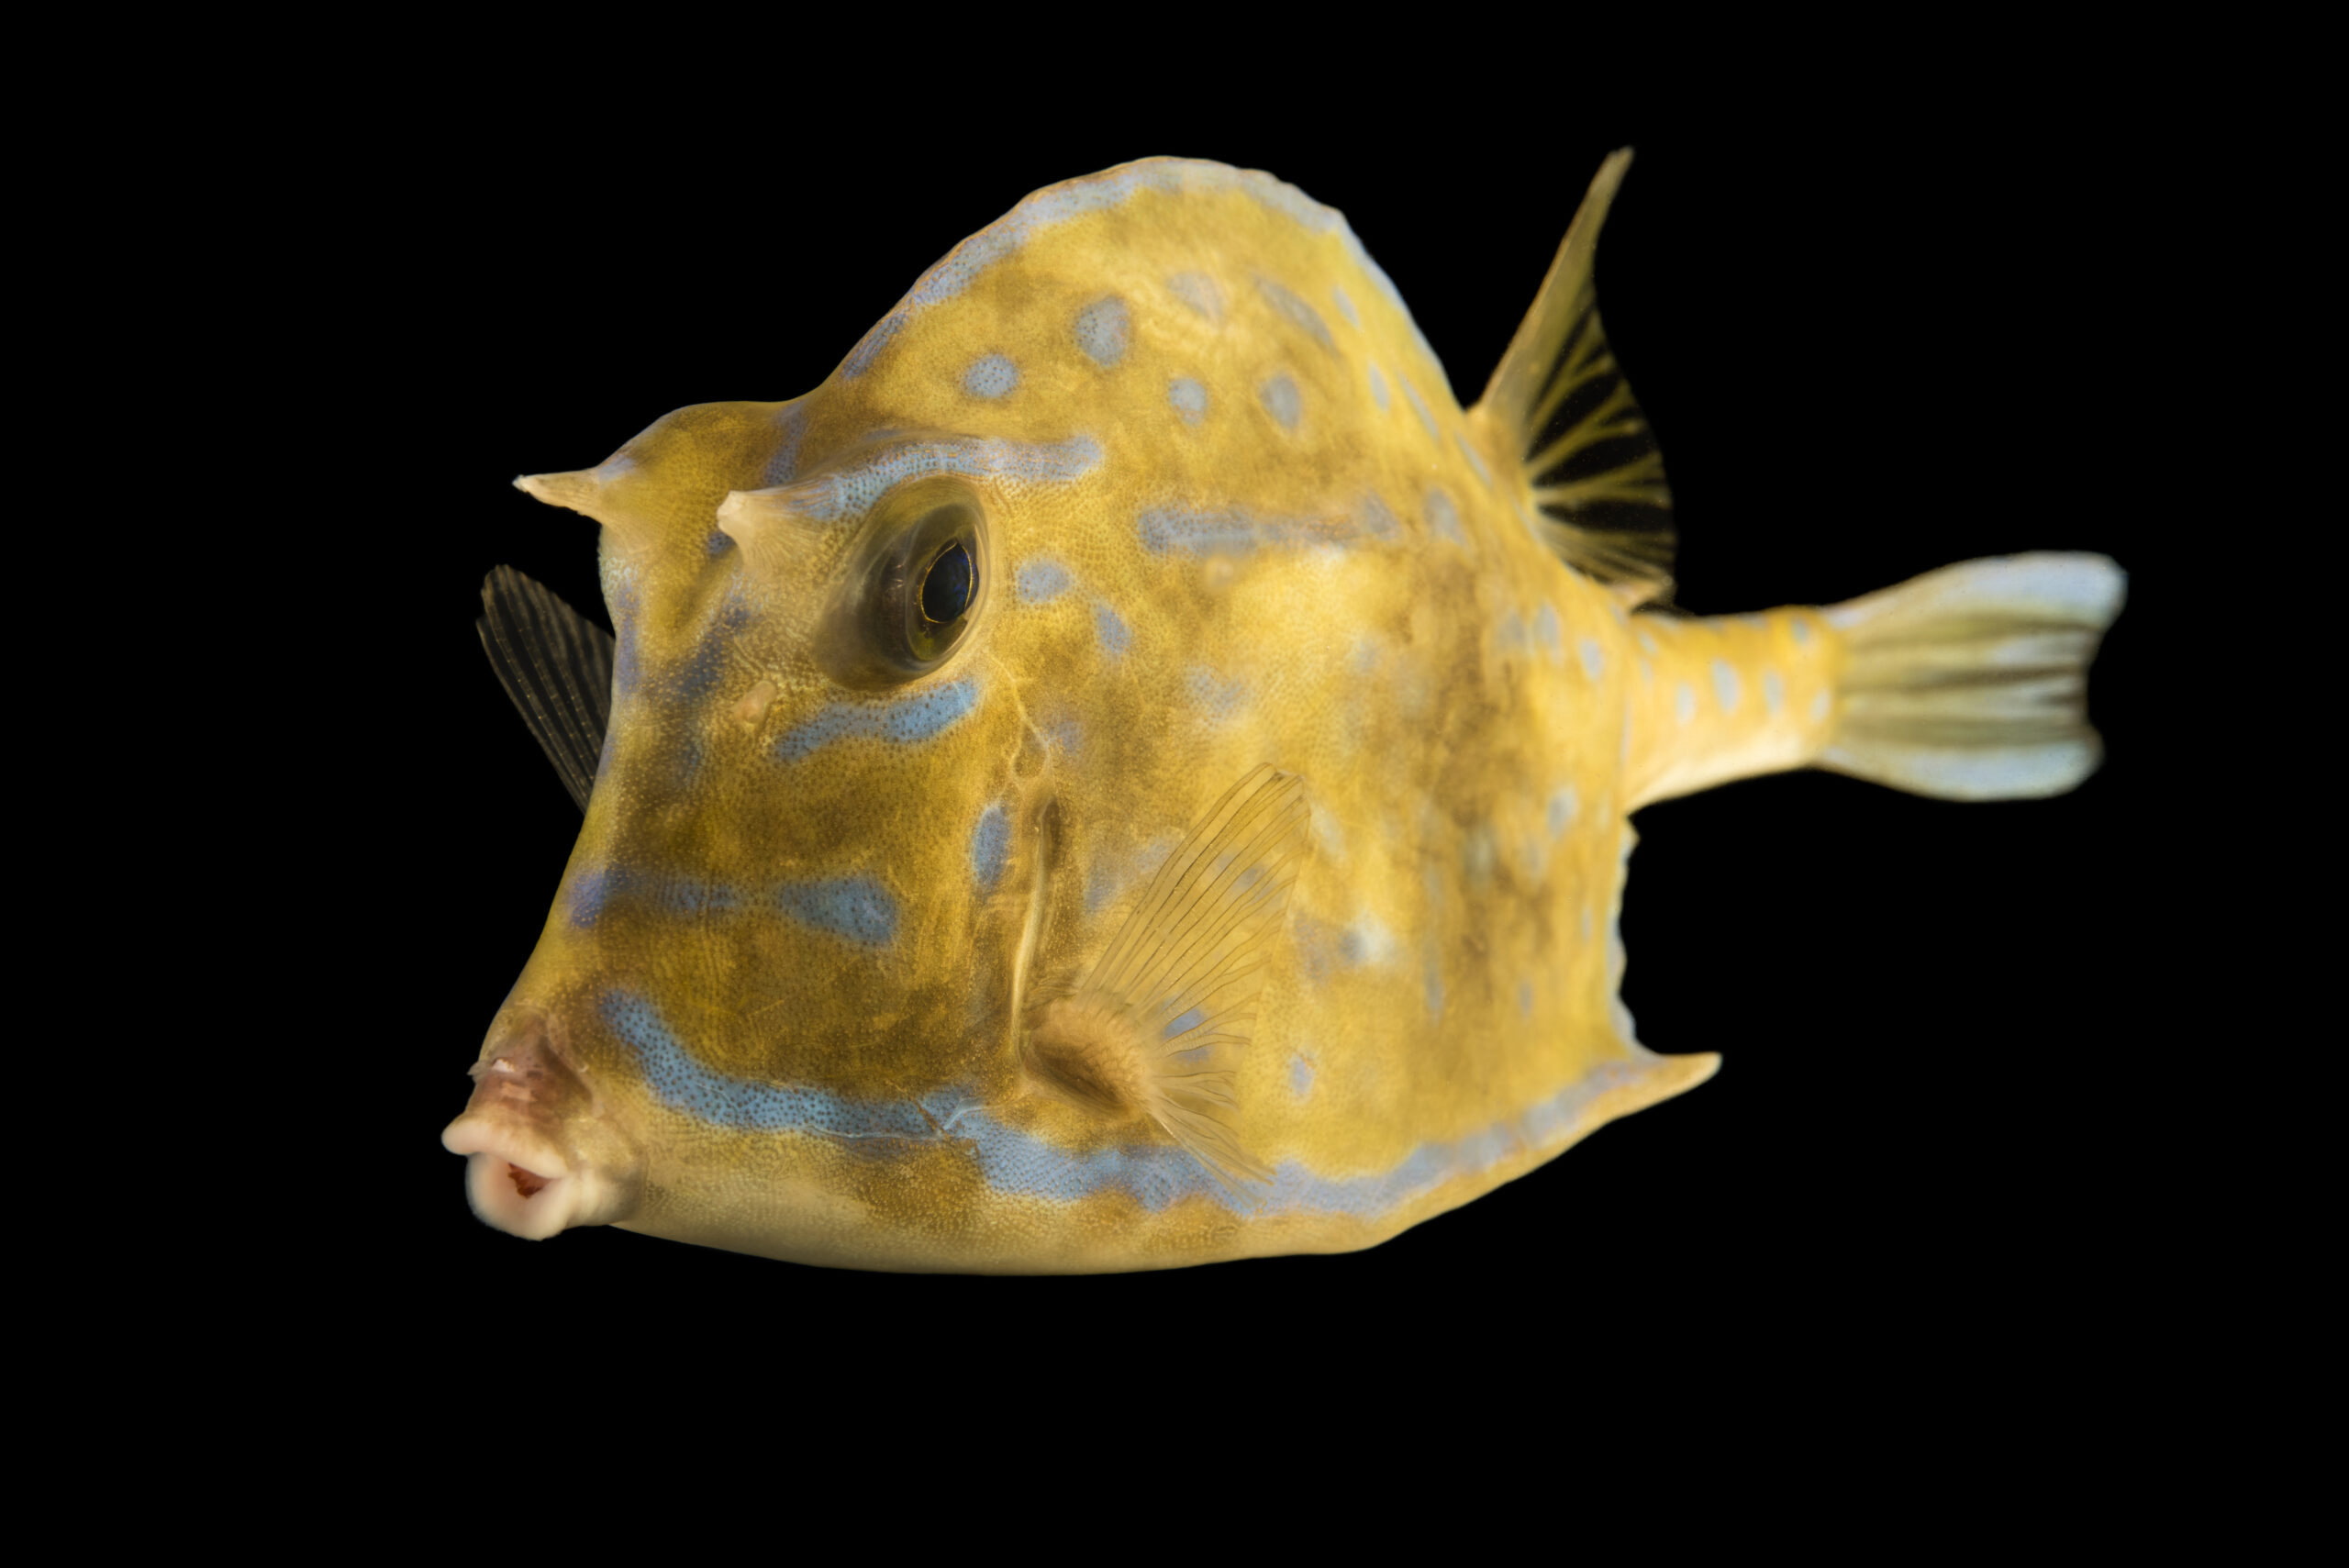 A cowfish (Lactophrys tricornis) at the Gulf Specimen Marine Lab and Aquarium.